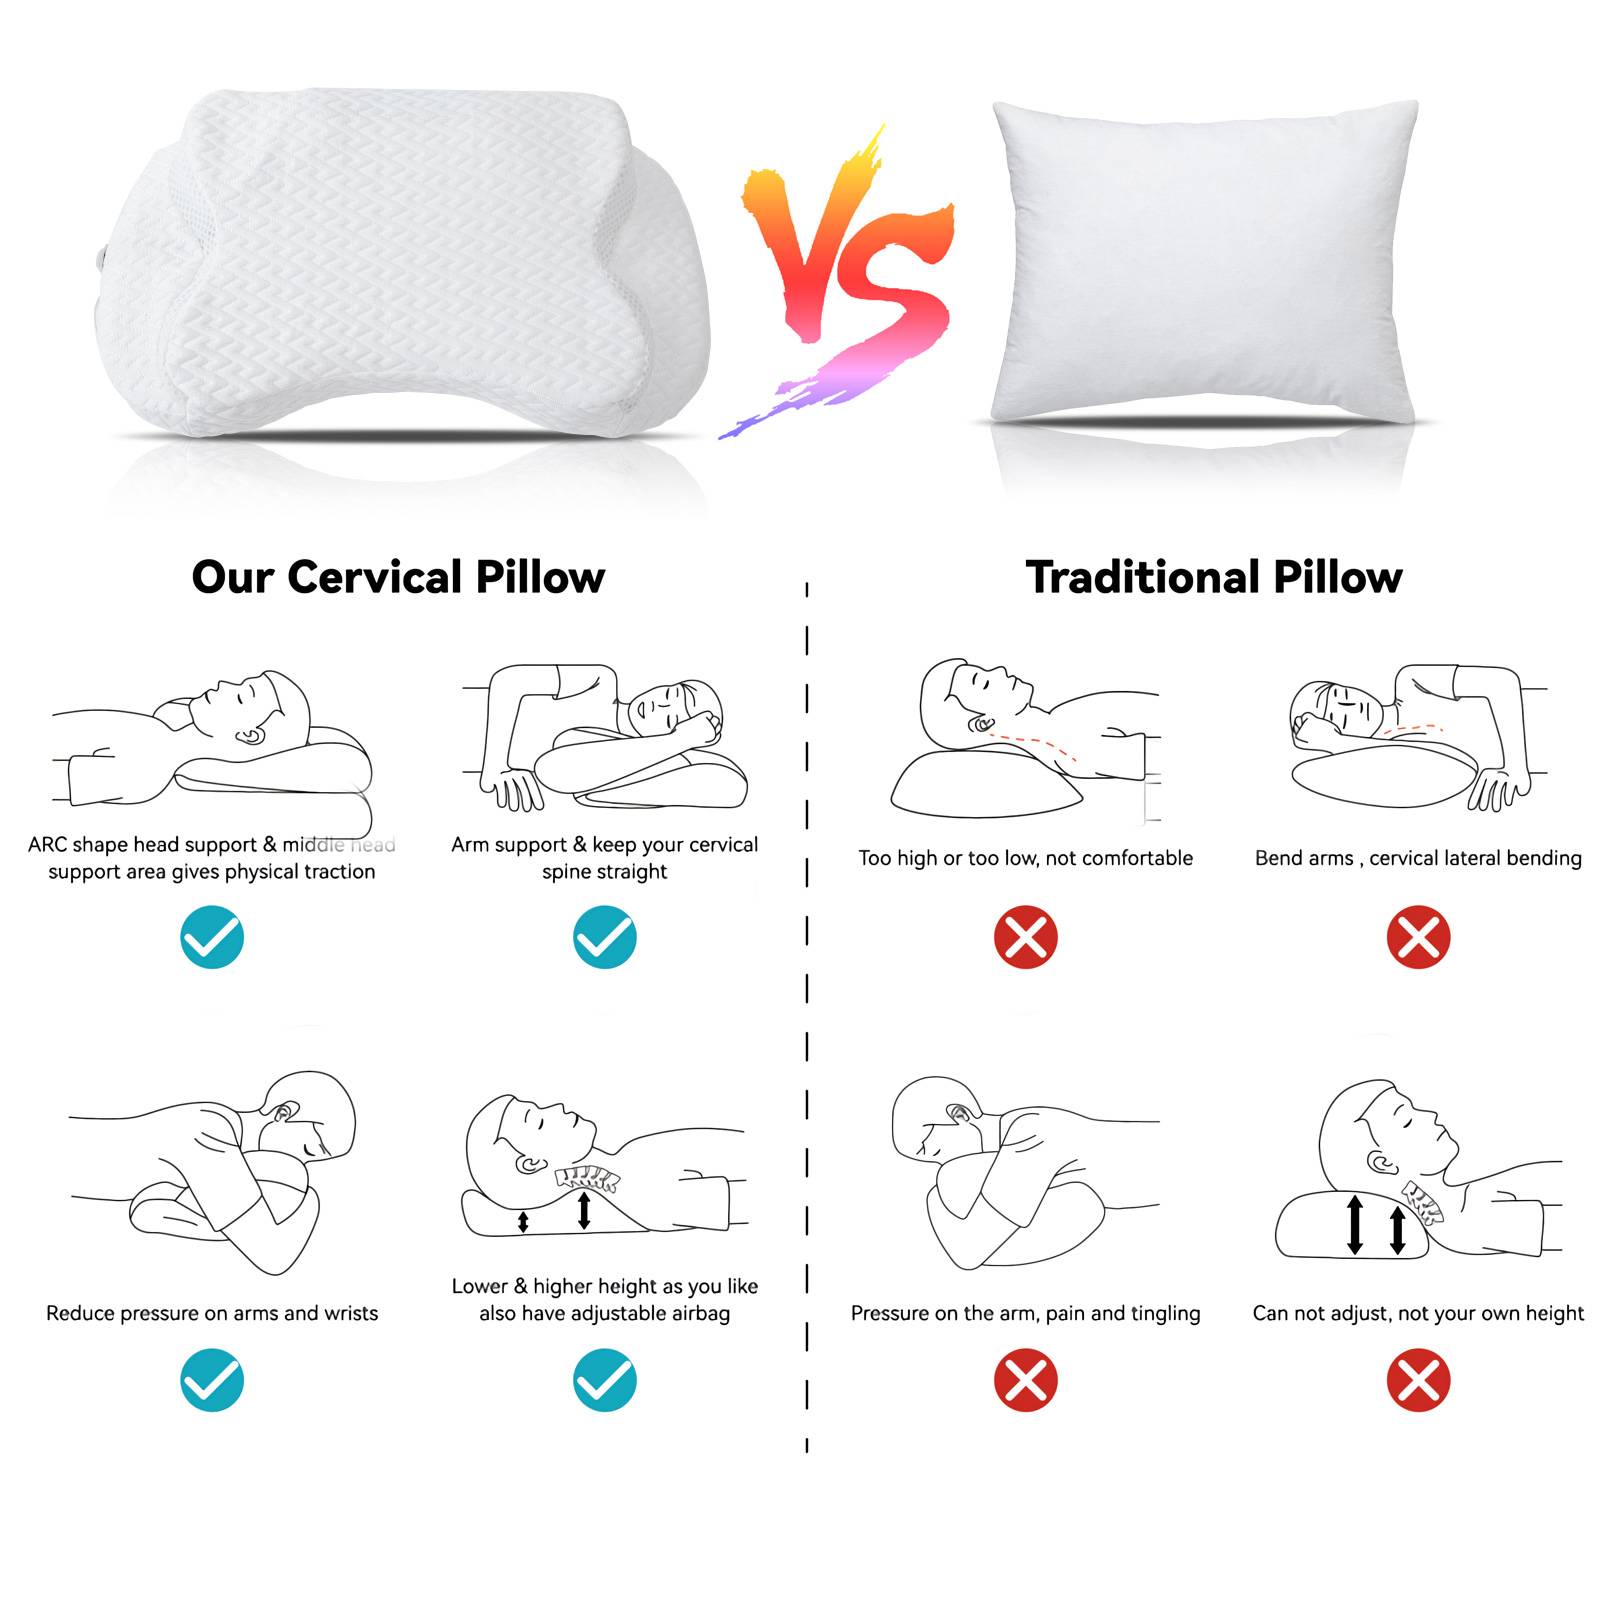 WSBArt Heating Air Bag Adjustable Height Cervical Memory Foam Pillow, Odorless Neck Pillows for Pain Relief, Orthopedic Contour Pillows for Sleeping, Ergonomic Pillow for Side, Back, Stomach Sleepers